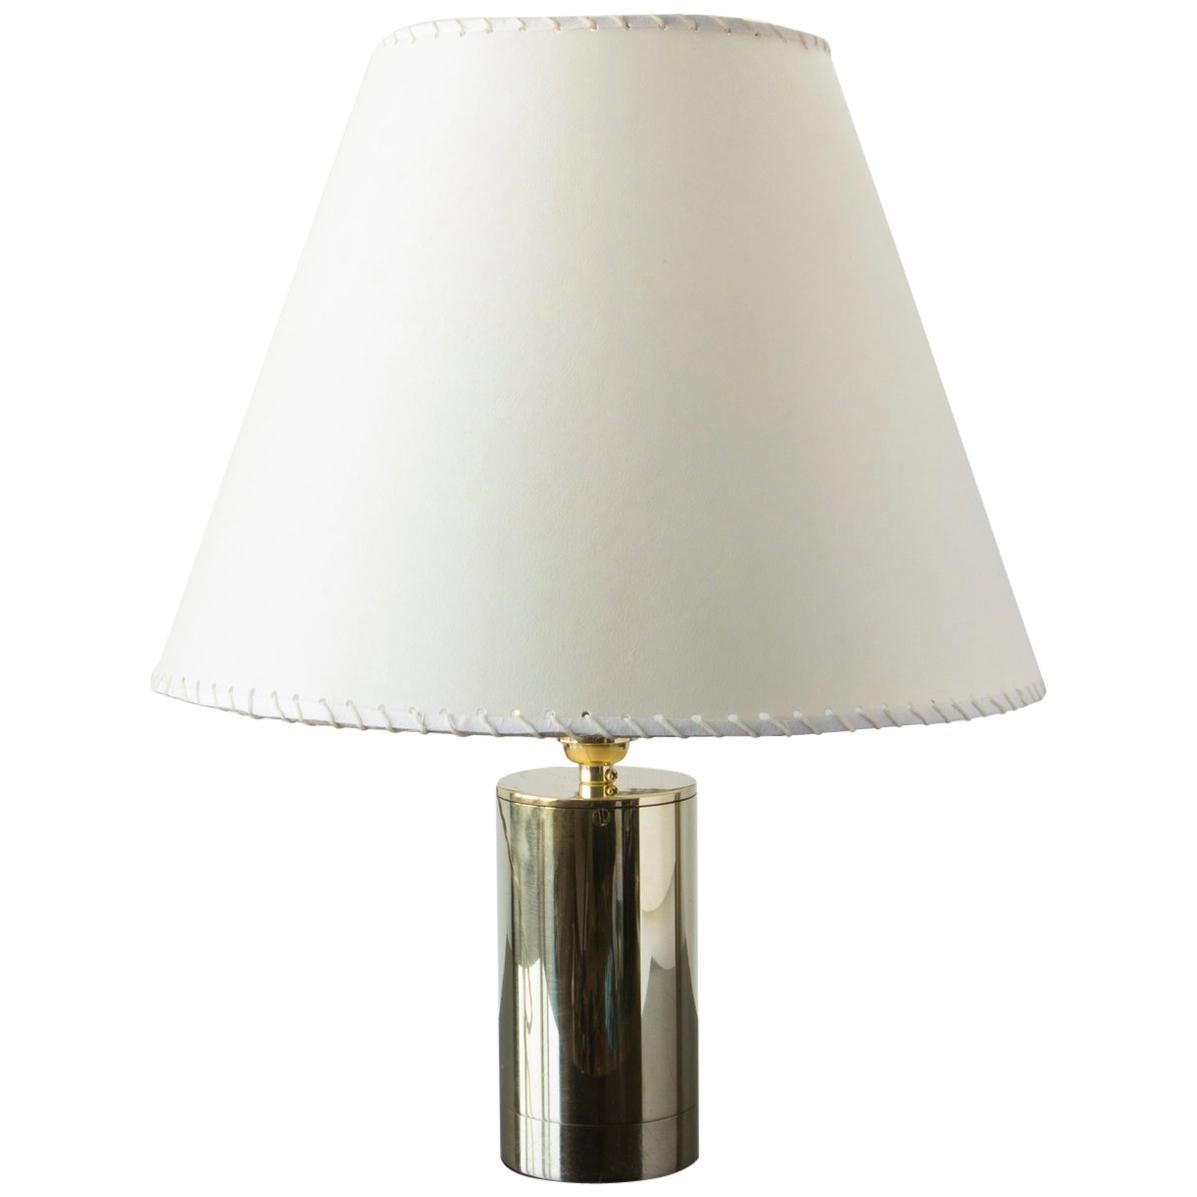 Series02 Table Lamp, Polished Unlacquered Brass, Goatskin Parchment Shade For Sale